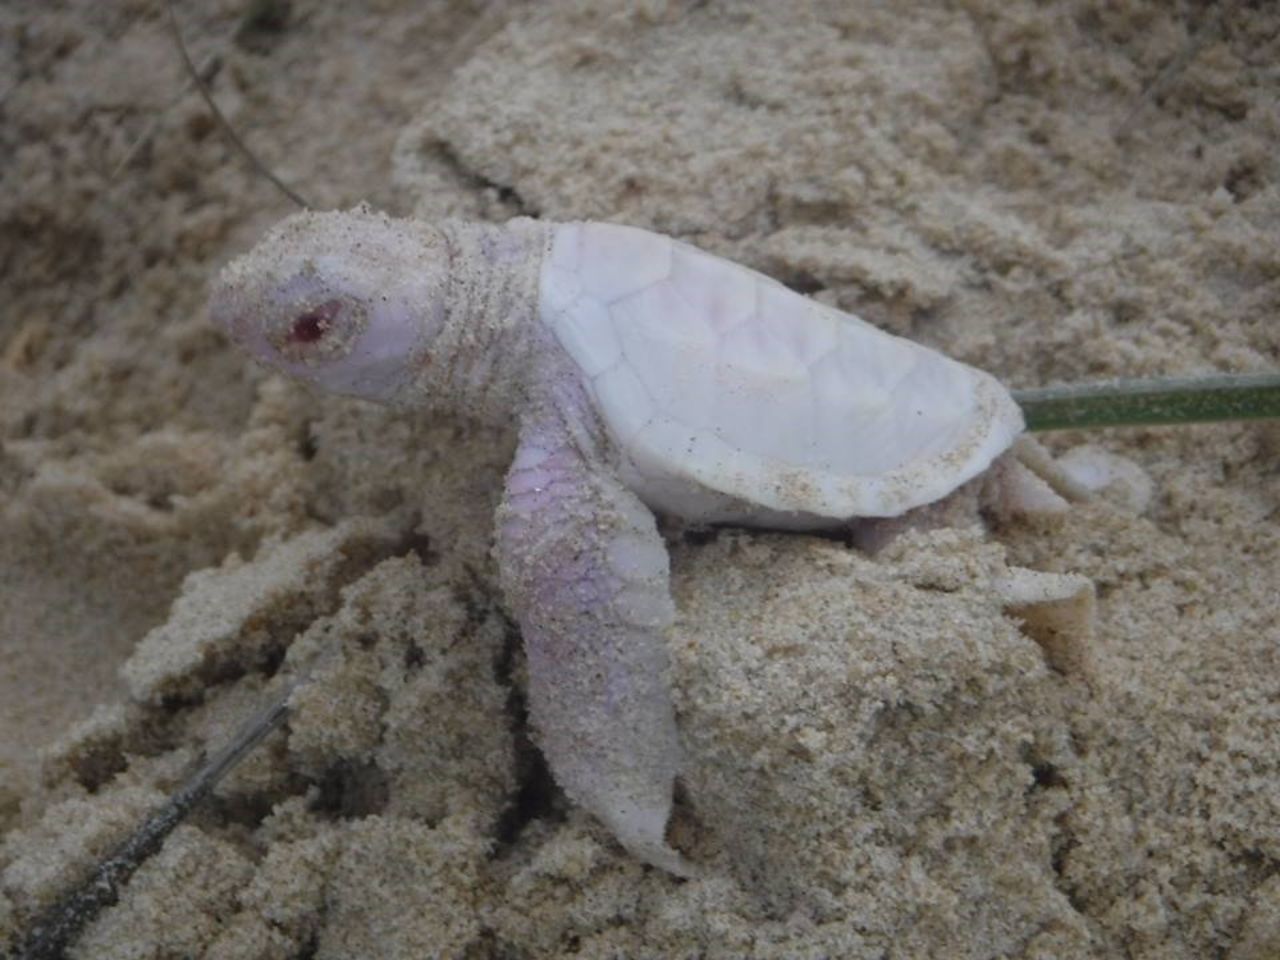 Alby, the albino Green turtle, hatched at Castaways Beach, near Noosa in Queensland, Australia at the weekend.